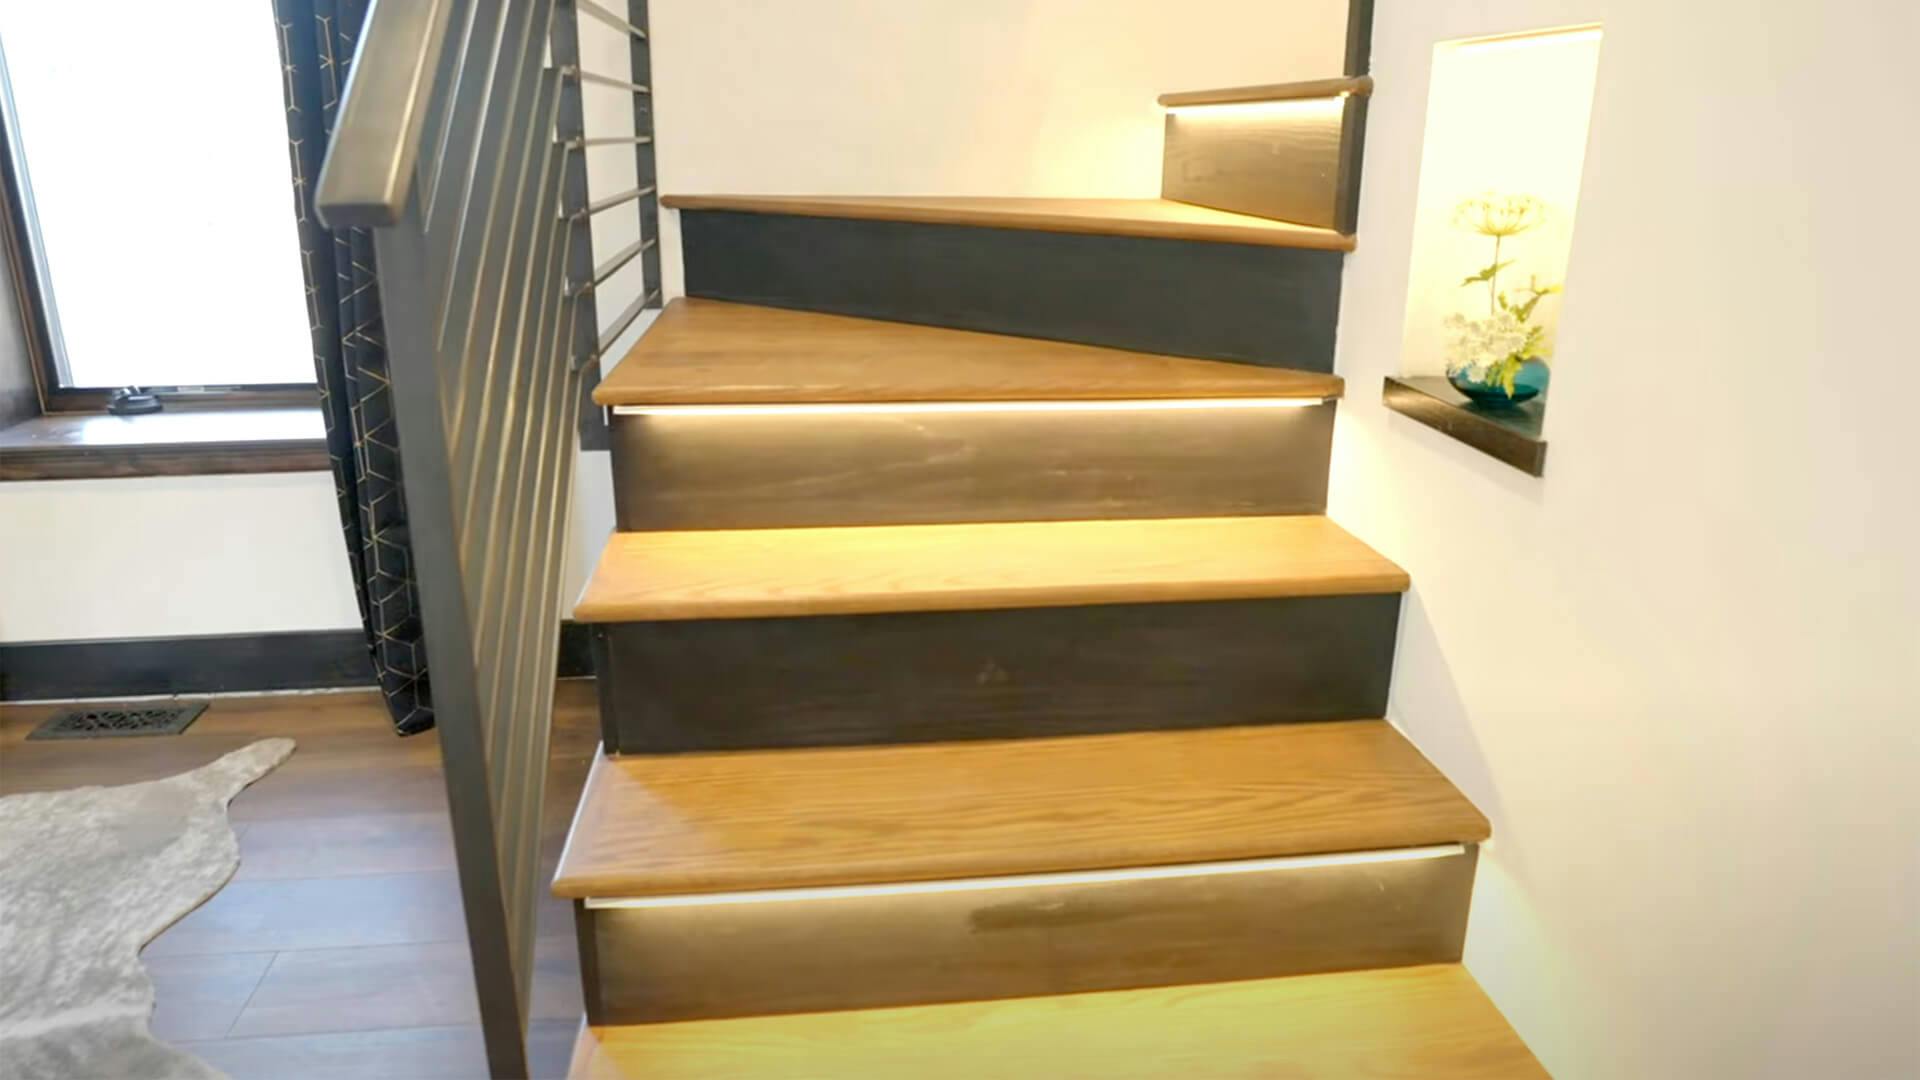 Wooden stairs with lights under each step